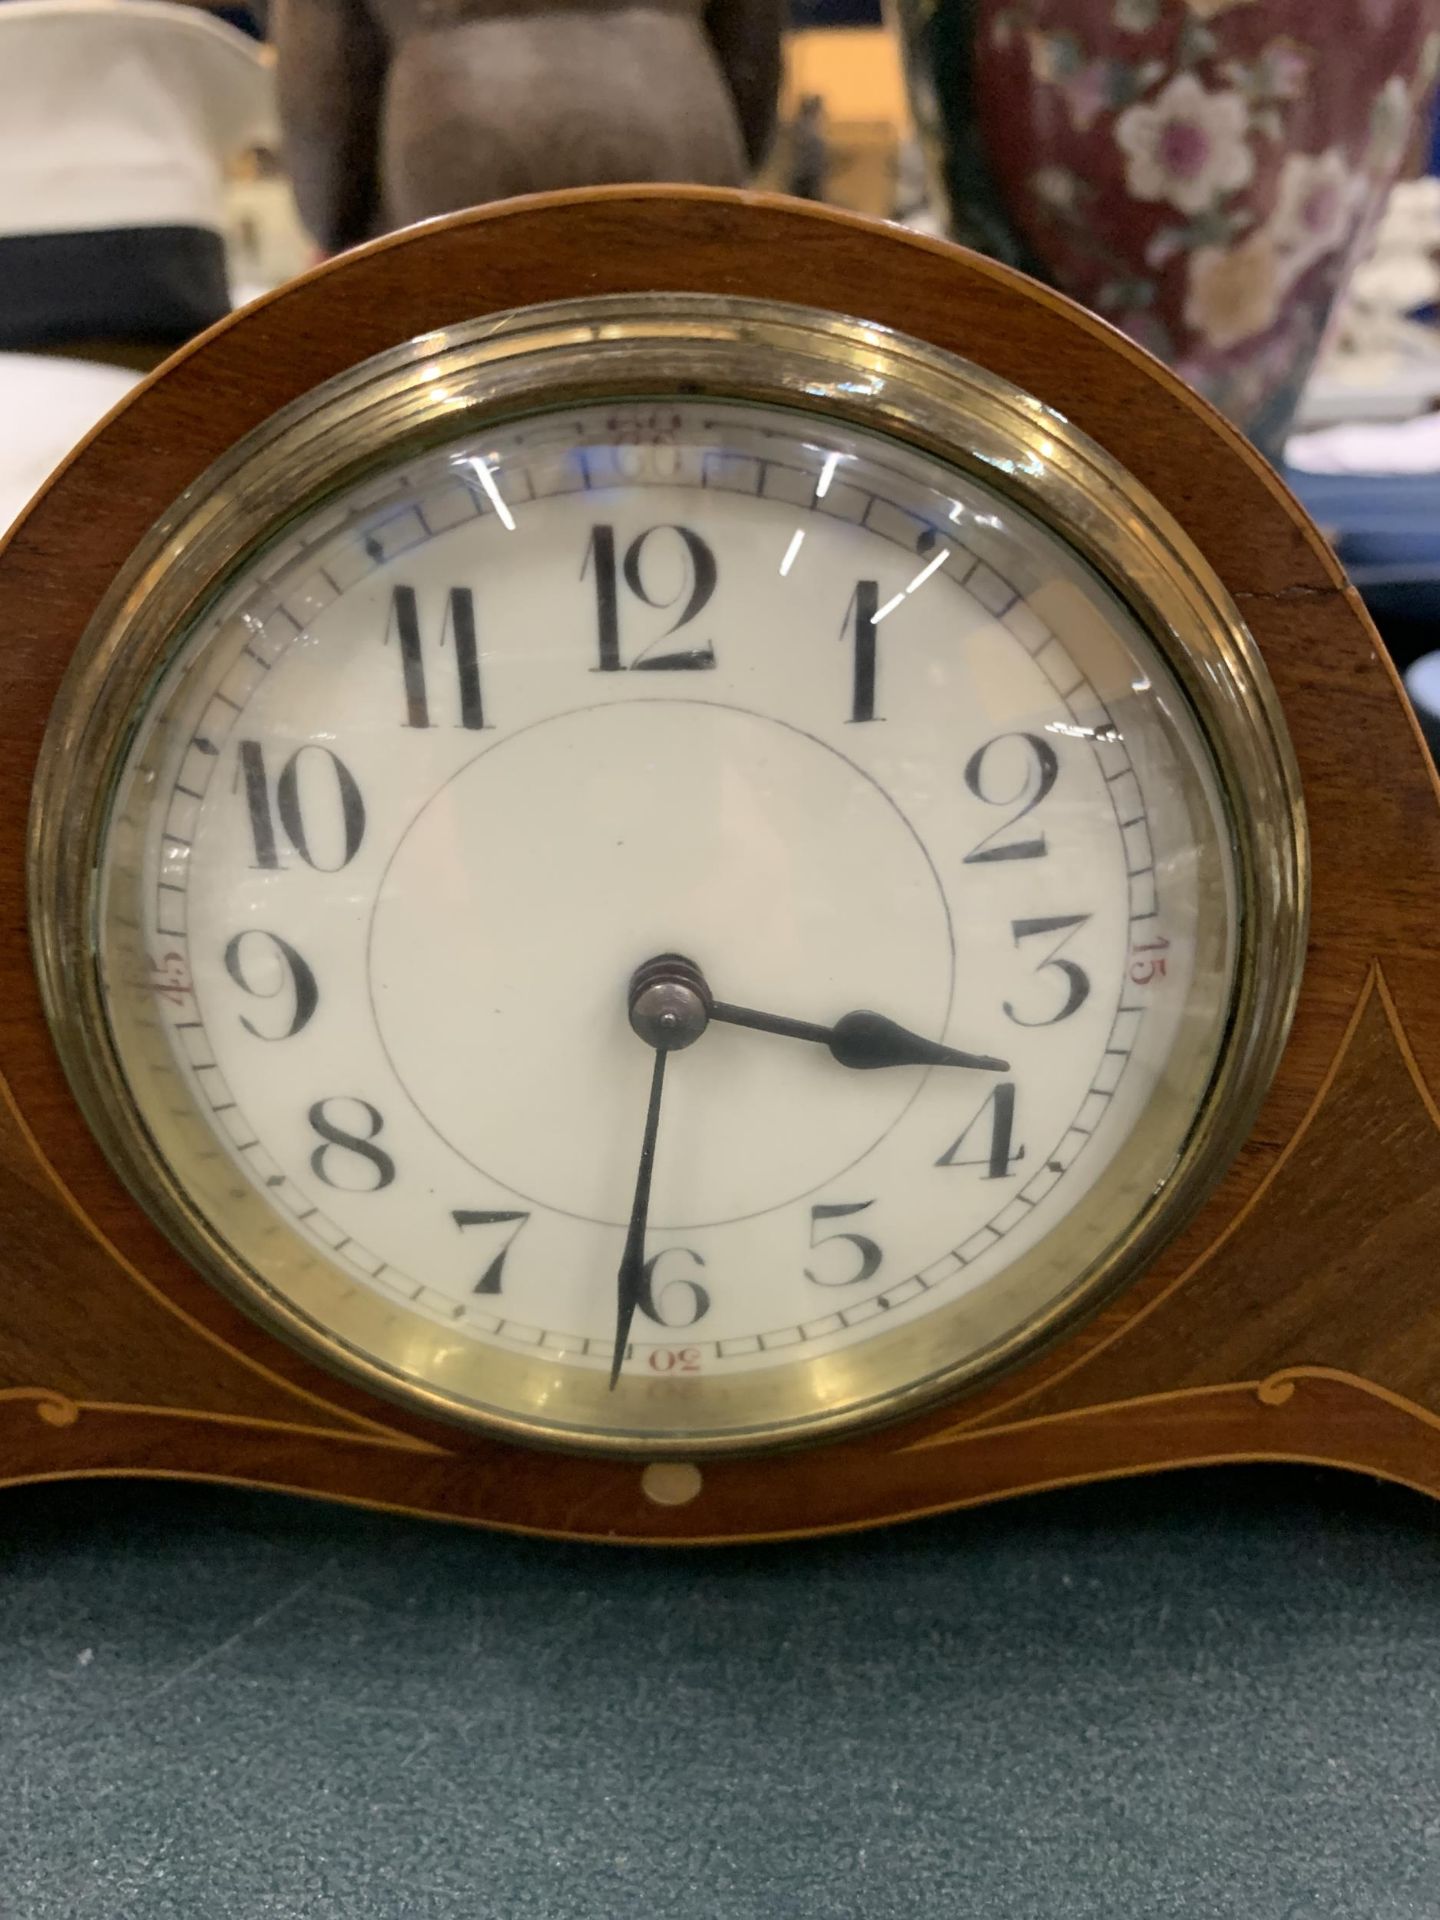 AN INLAID EDWARDIAN MANTLE CLOCK - Image 3 of 3